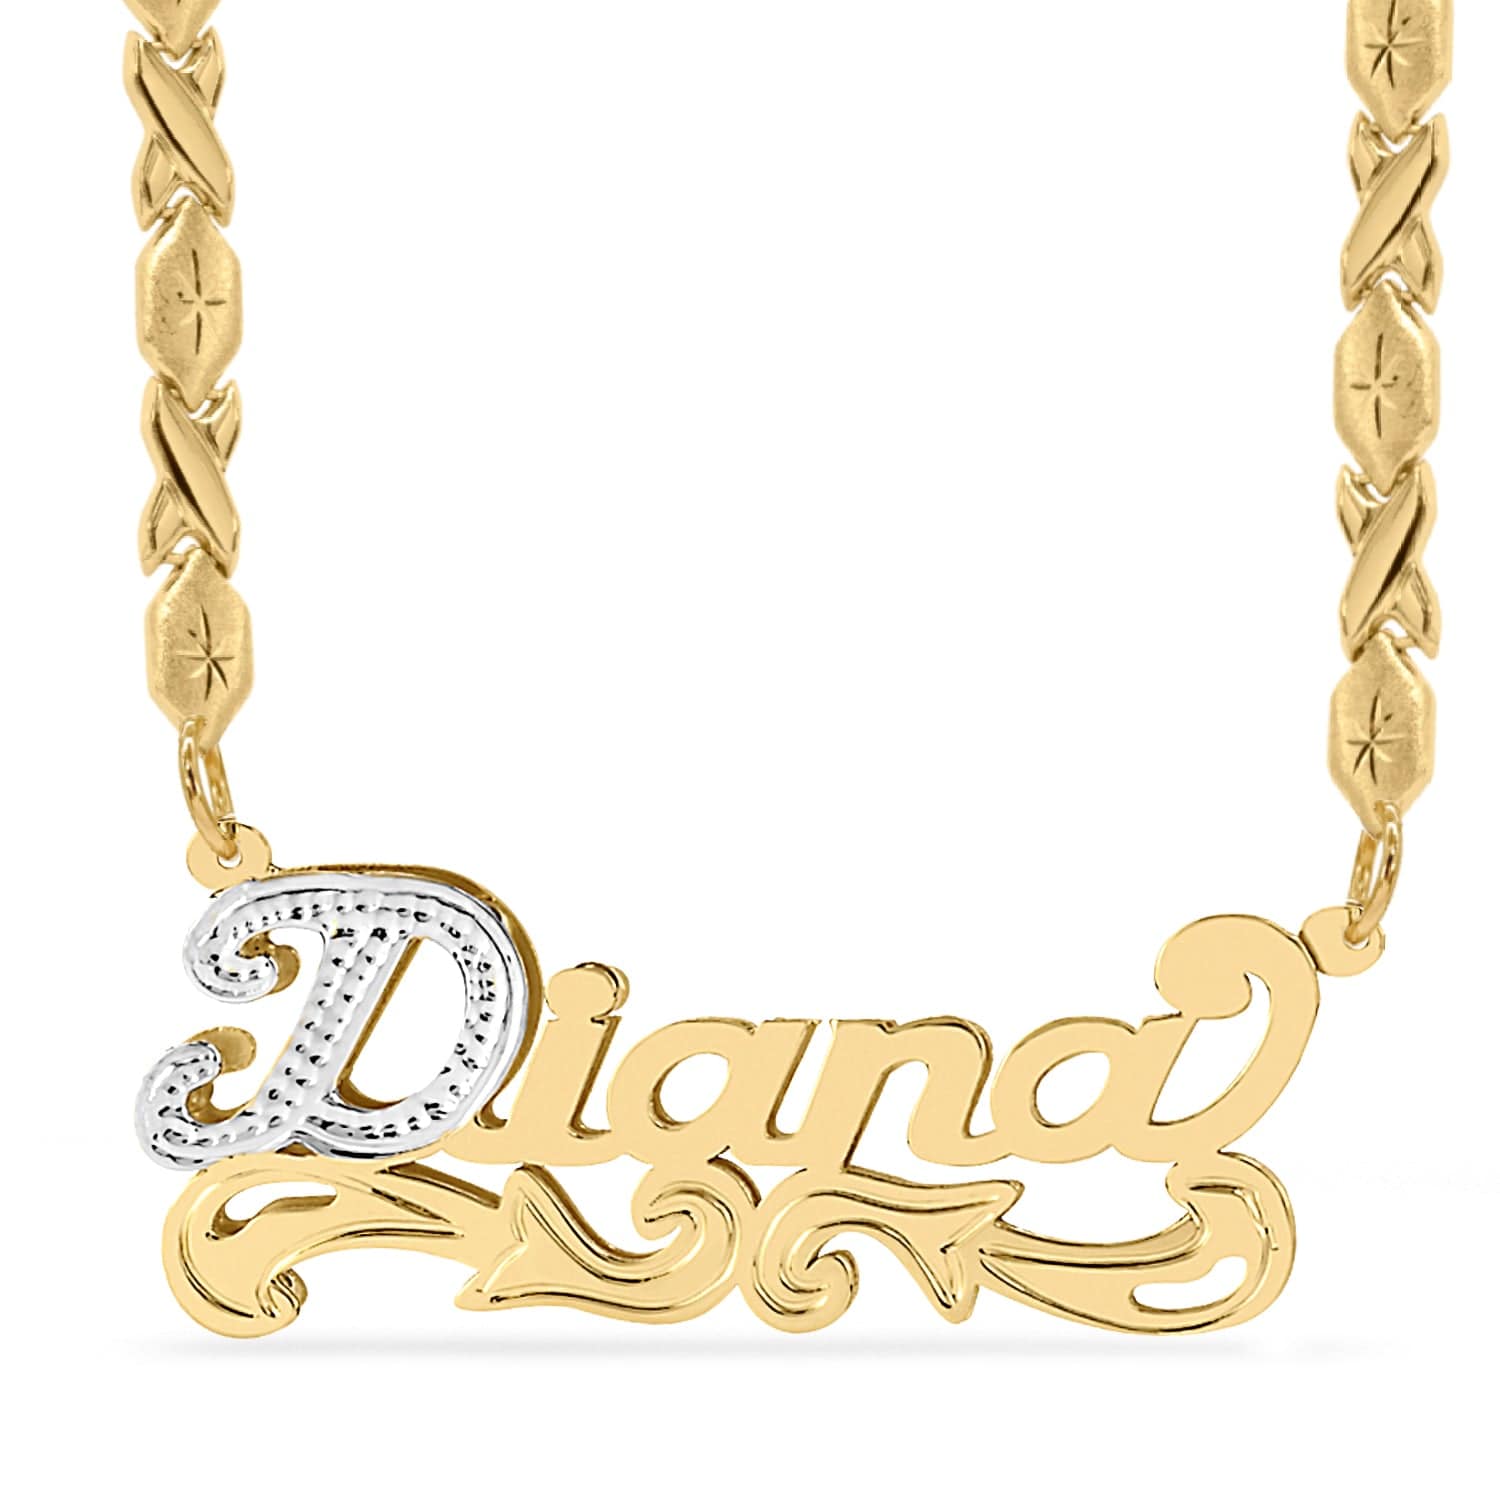 Two-Tone. Sterling Silver / Xoxo Chain Double Plated Nameplate Necklace "Diana" with Xoxo chain